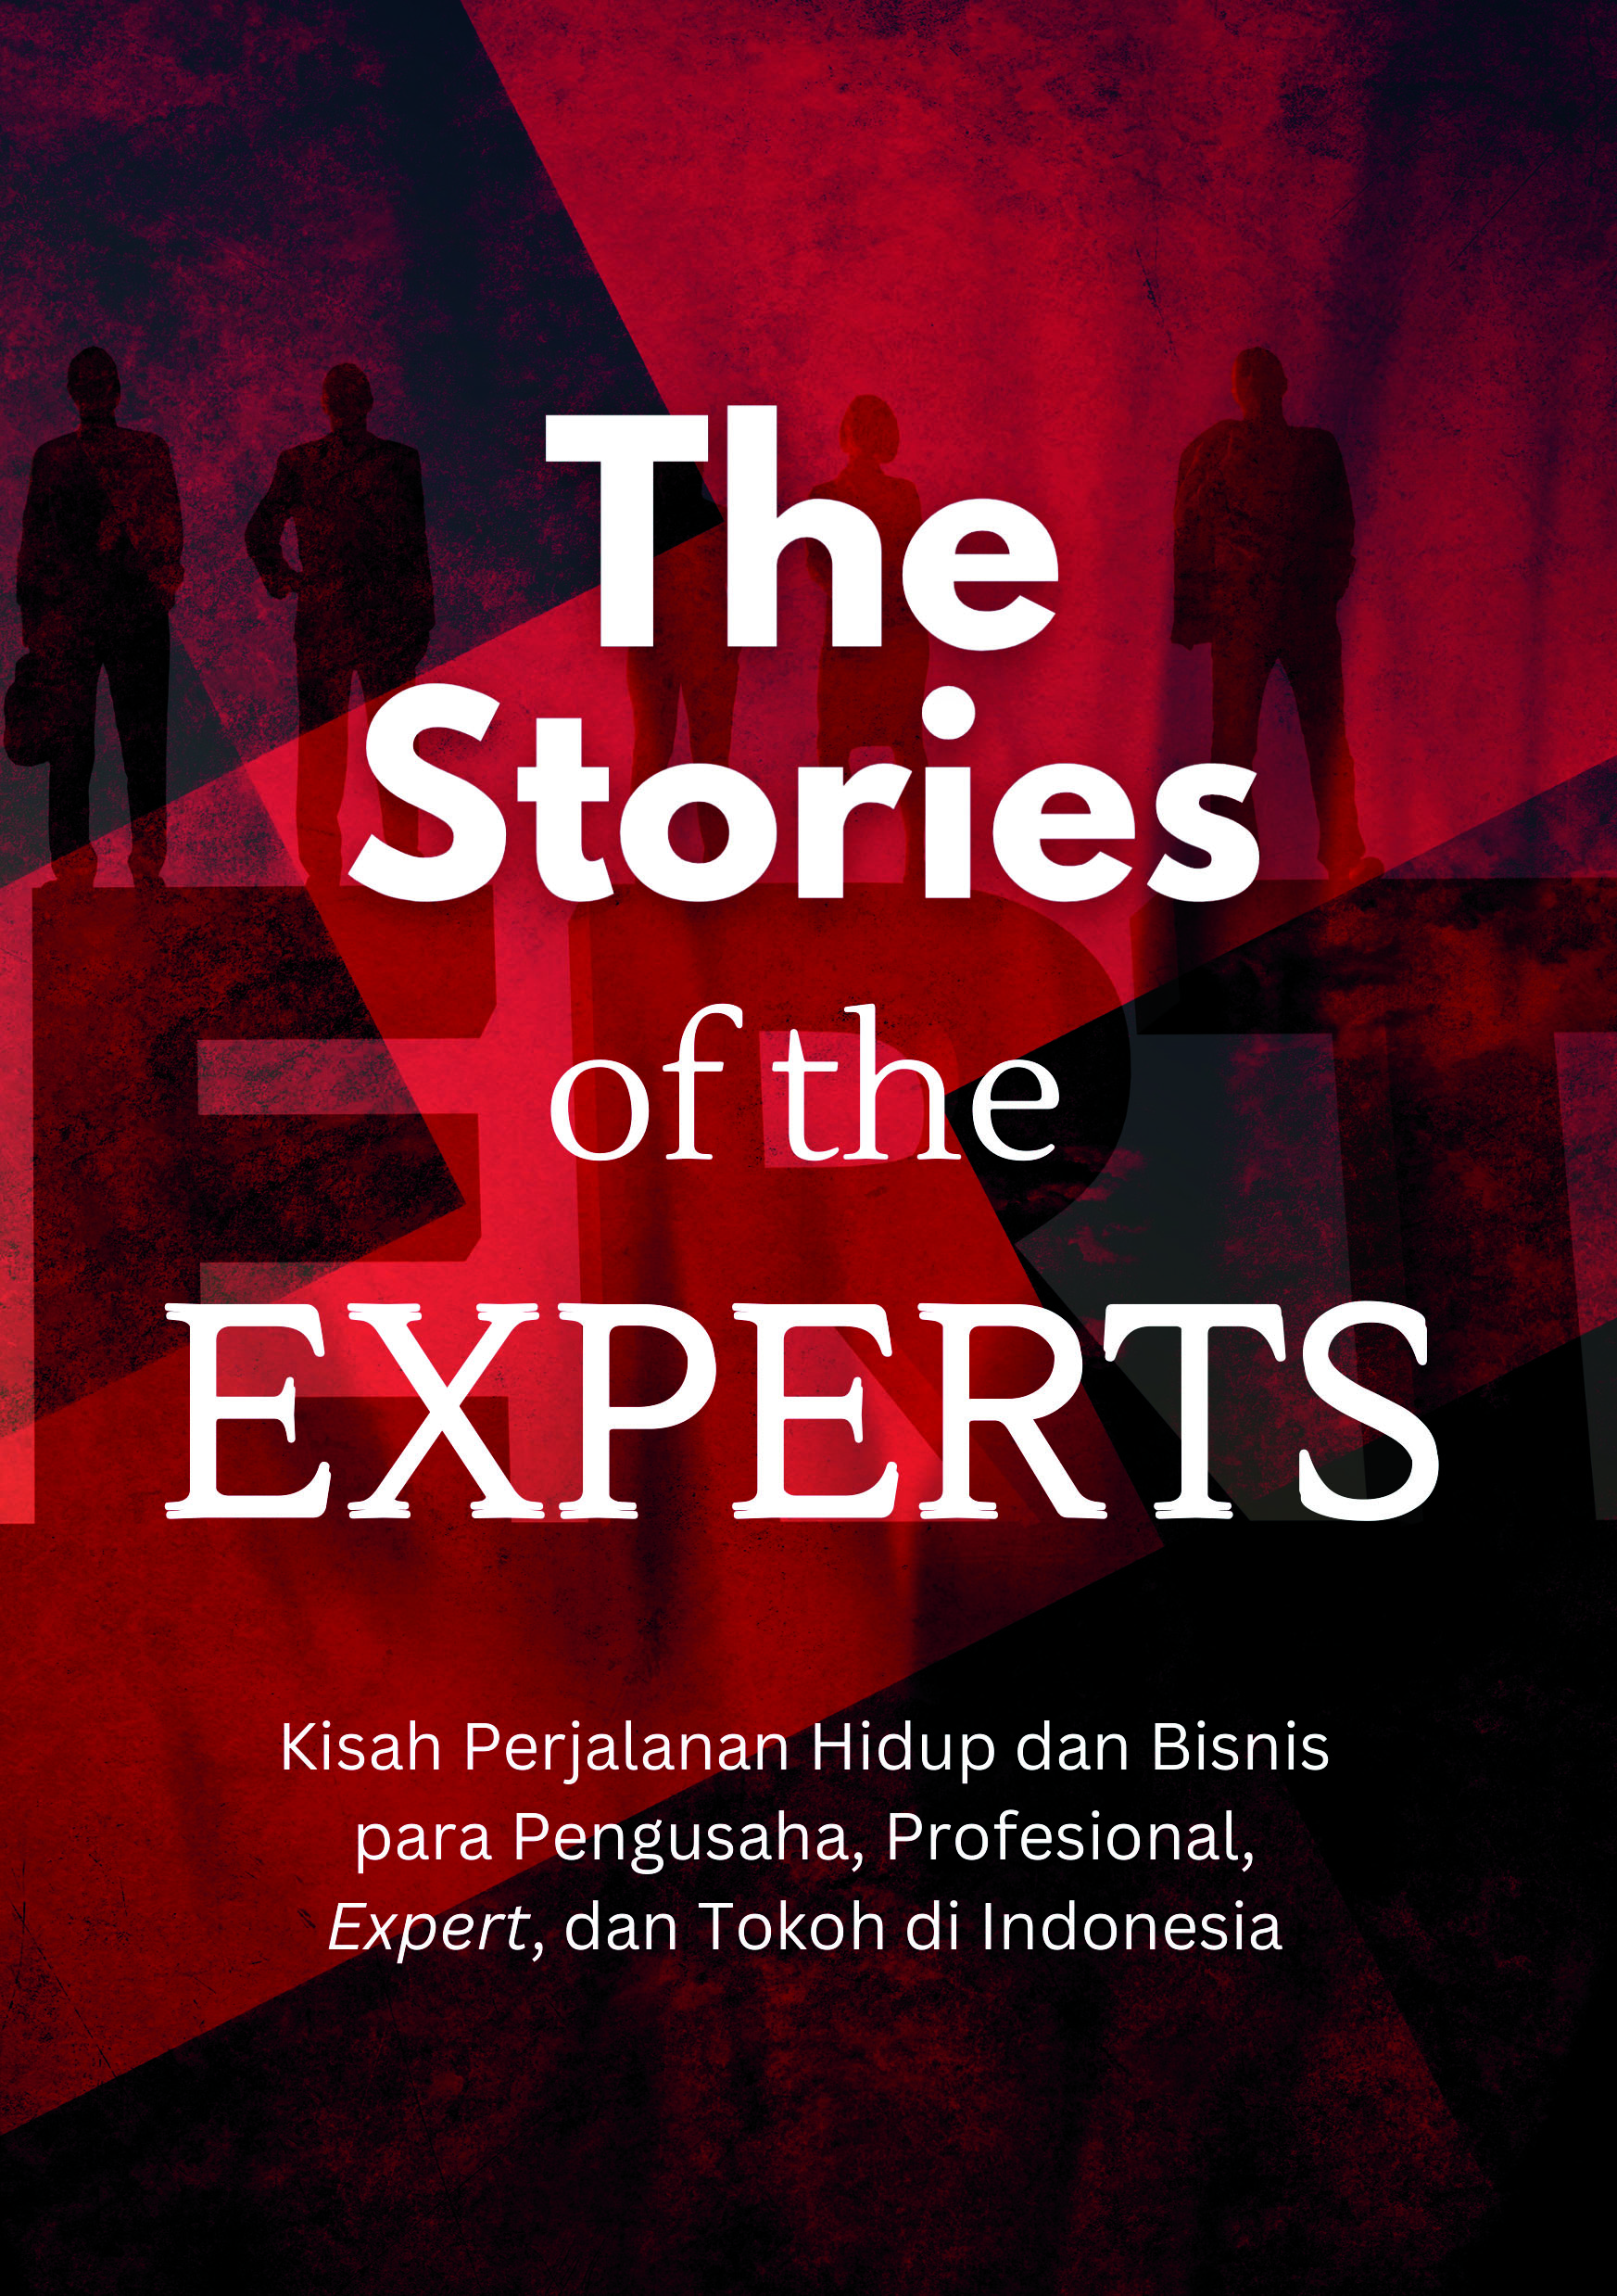 Cover_The STORIES of the EXPERTS_230209_130631-1